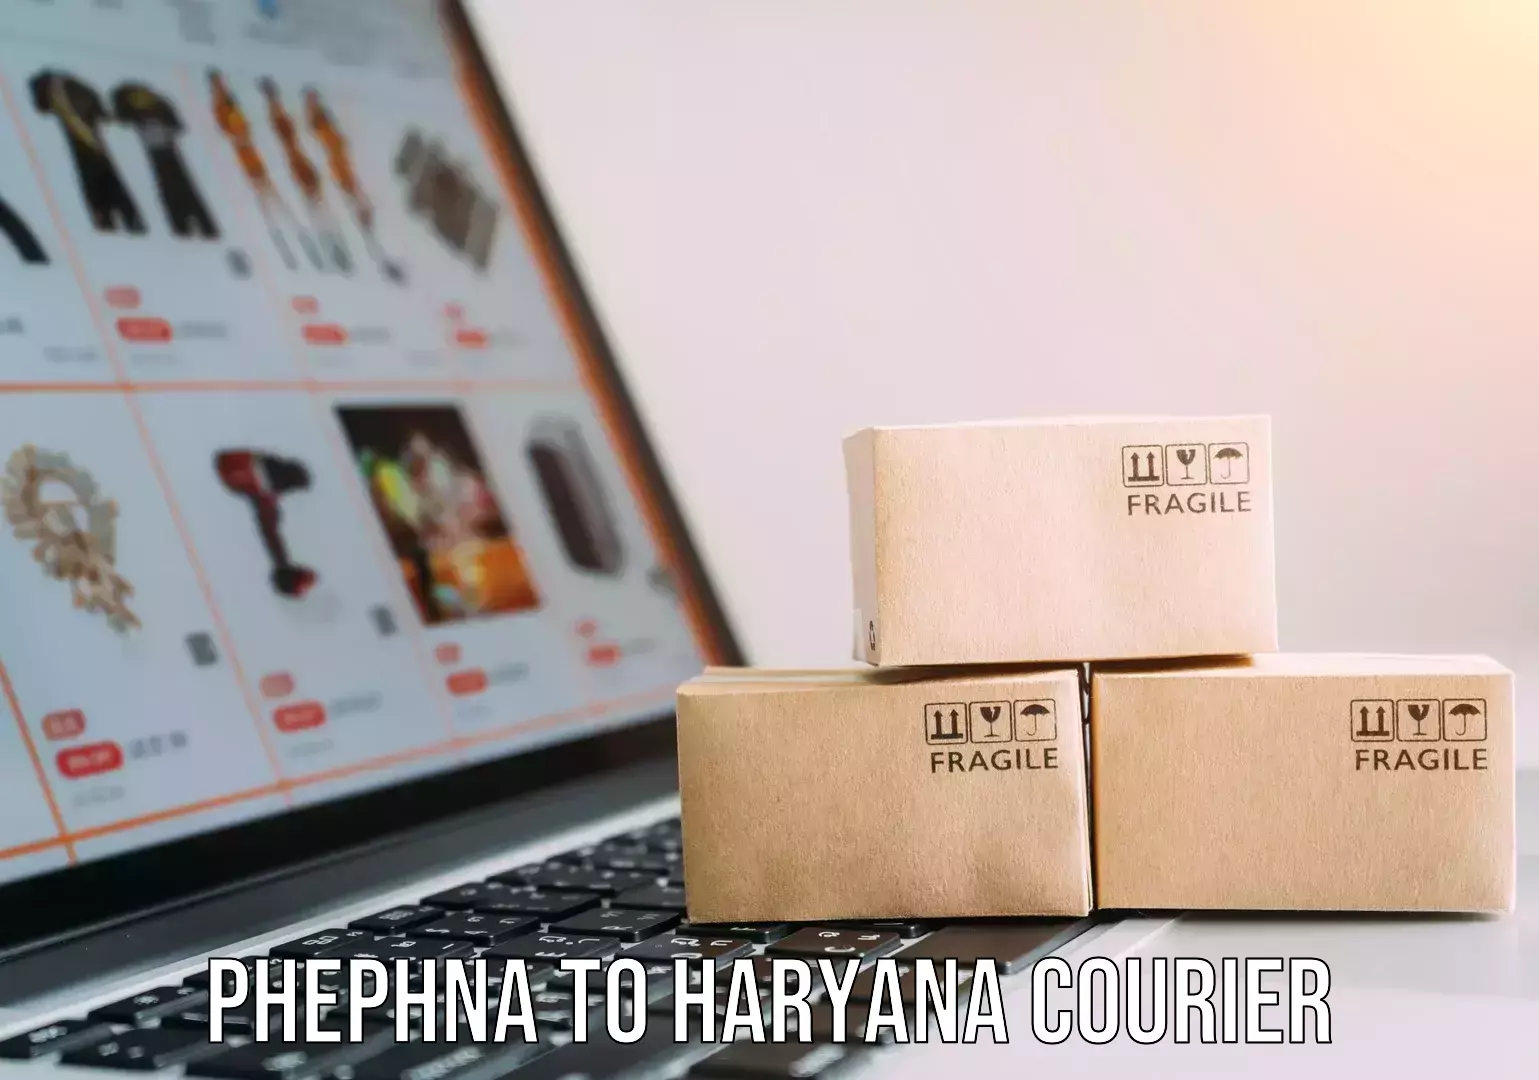 Moving service excellence Phephna to Haryana